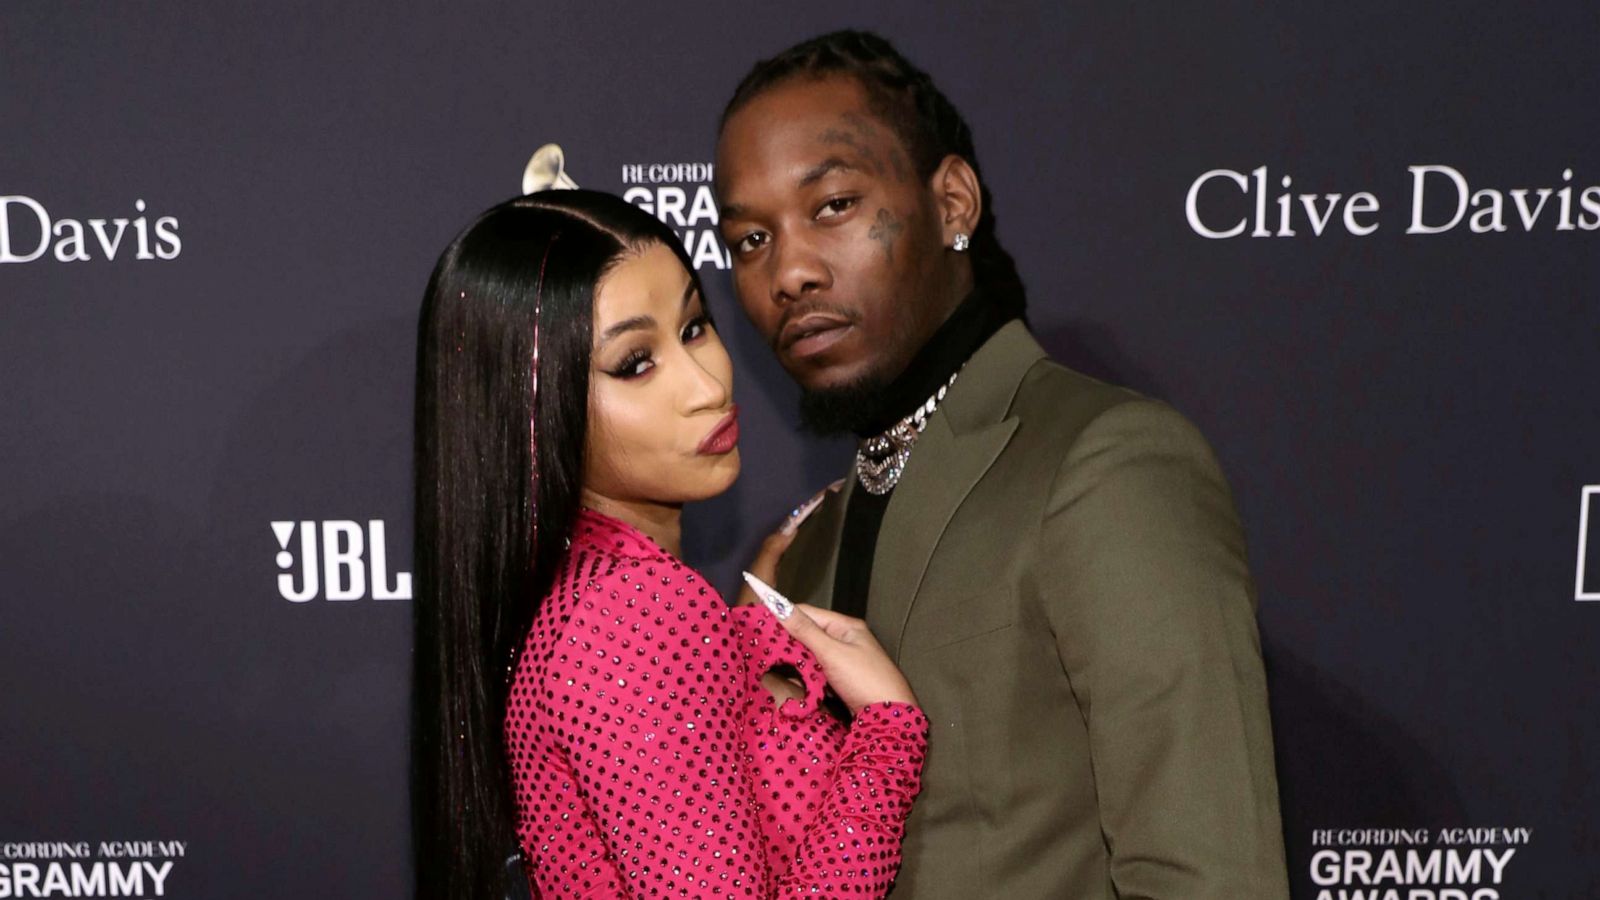 Cardi B shares adorable family photos with husband Offset from